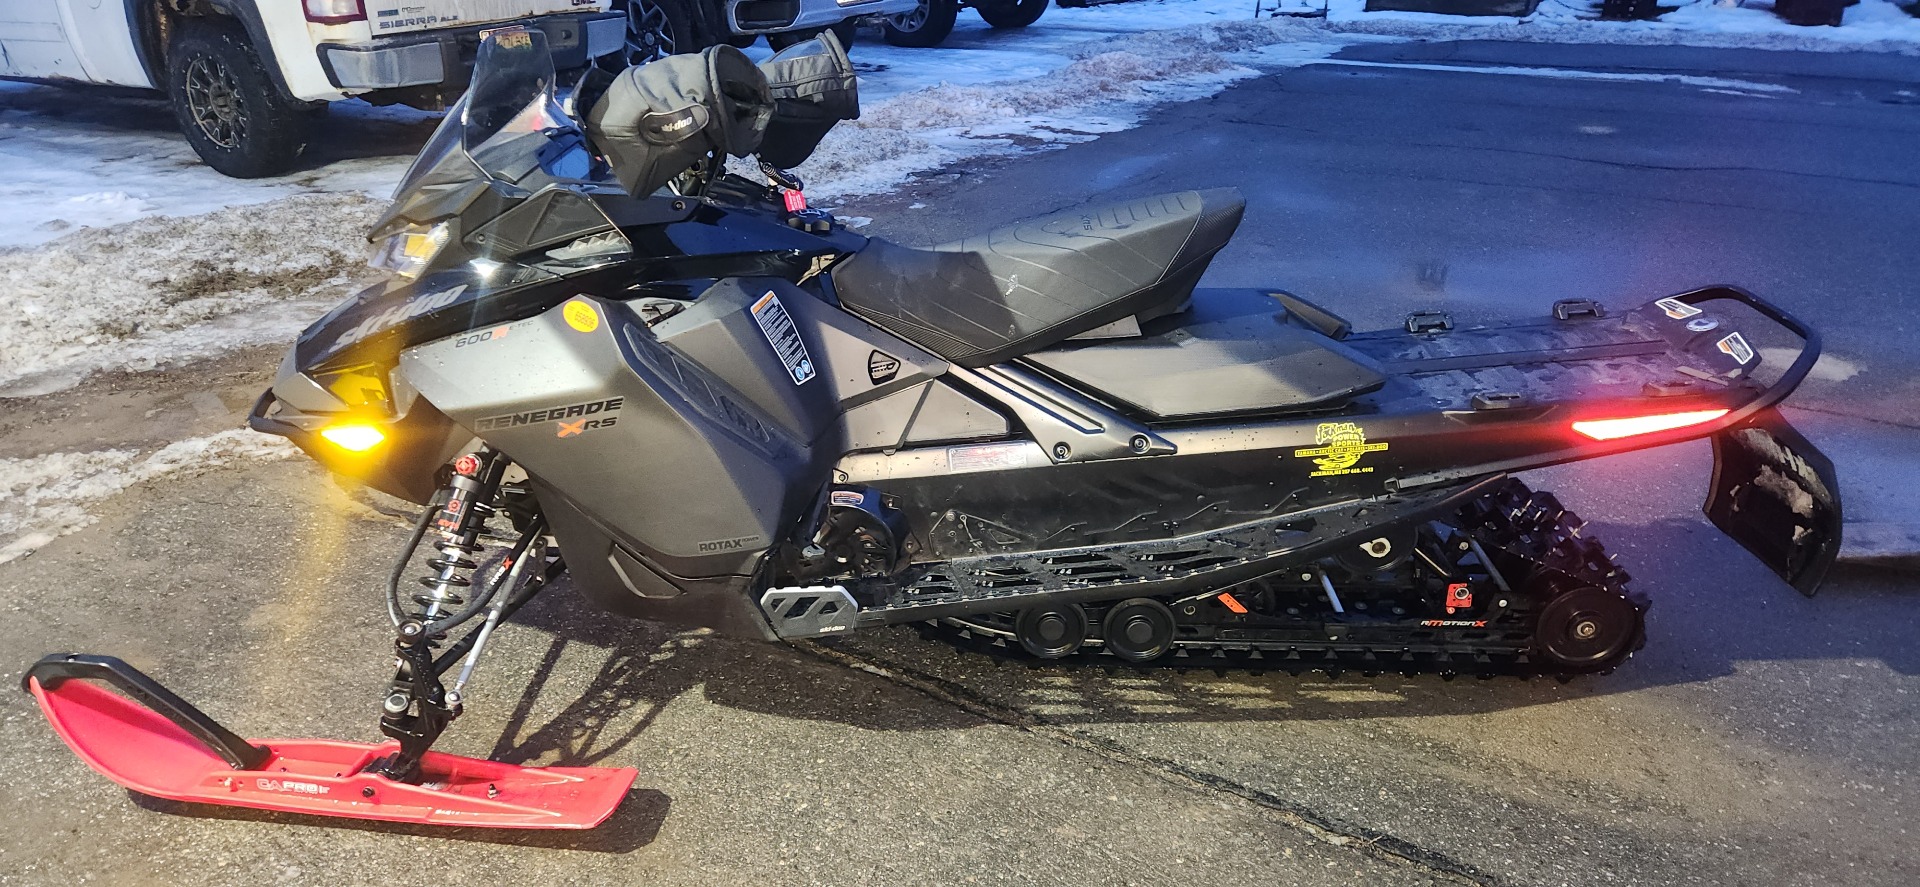 2023 Ski-Doo Renegade X-RS 600 E-TEC w/ Competition pkg. 2-ply Ripsaw 1.25 in Unity, Maine - Photo 1